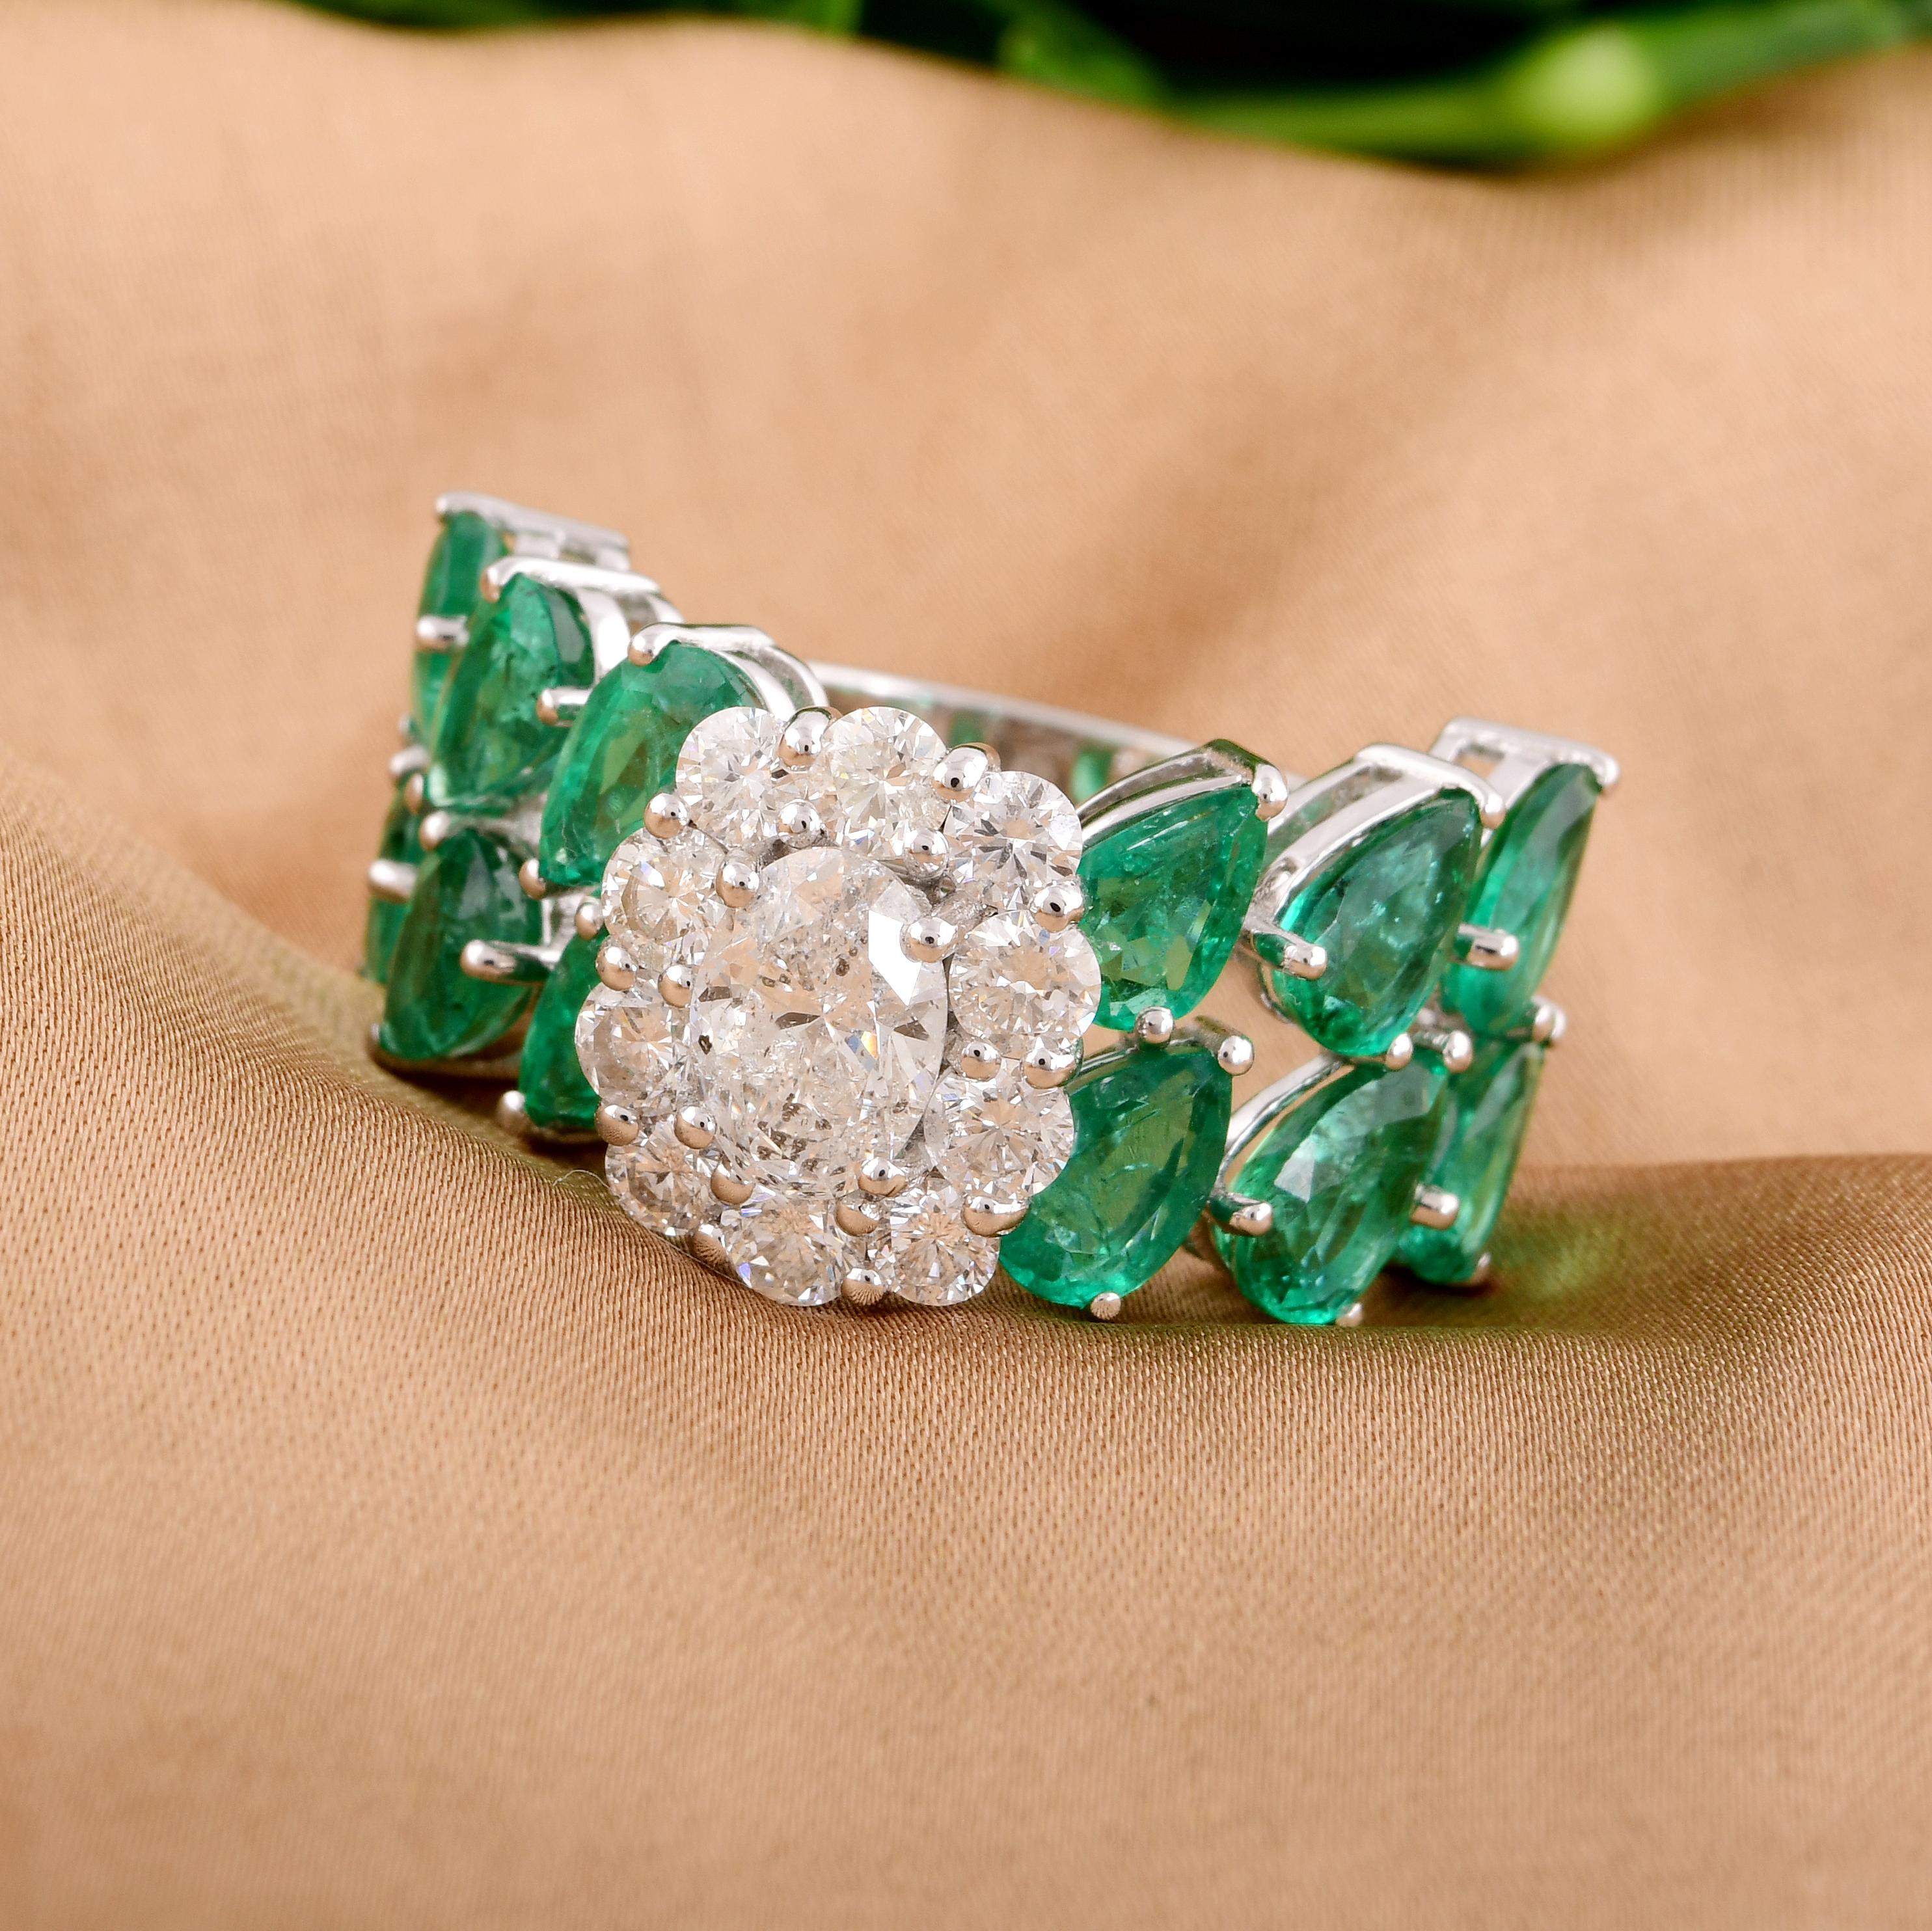 This handmade ring is a timeless and elegant choice, suitable for both formal occasions and everyday wear. It is a statement piece that showcases the natural allure of the emerald and the brilliance of the diamonds, making it a cherished addition to